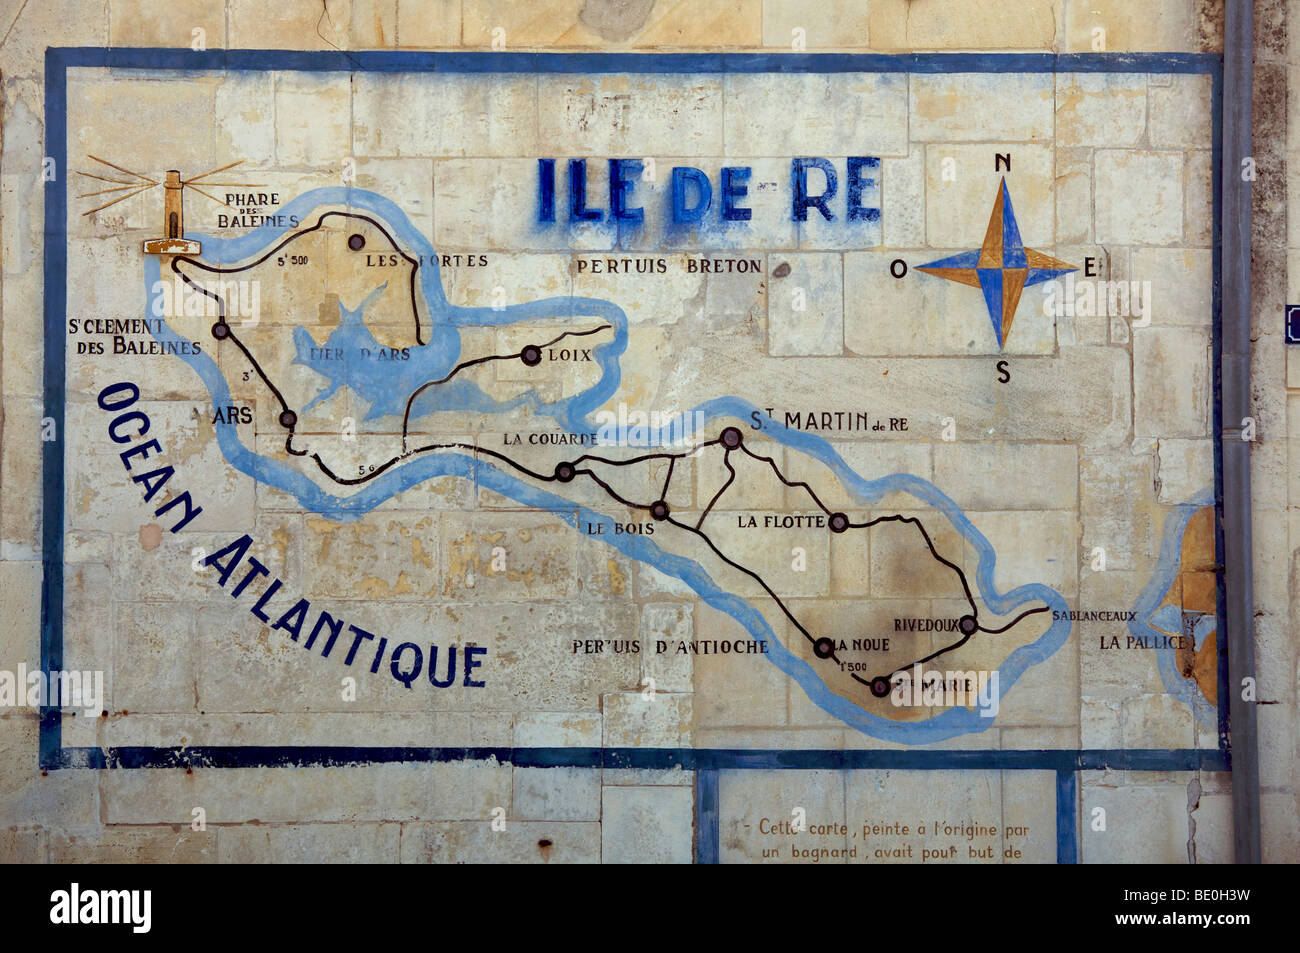 Island map on wall , Harbour at St Martin de Re, ile de Re, France Stock Photo